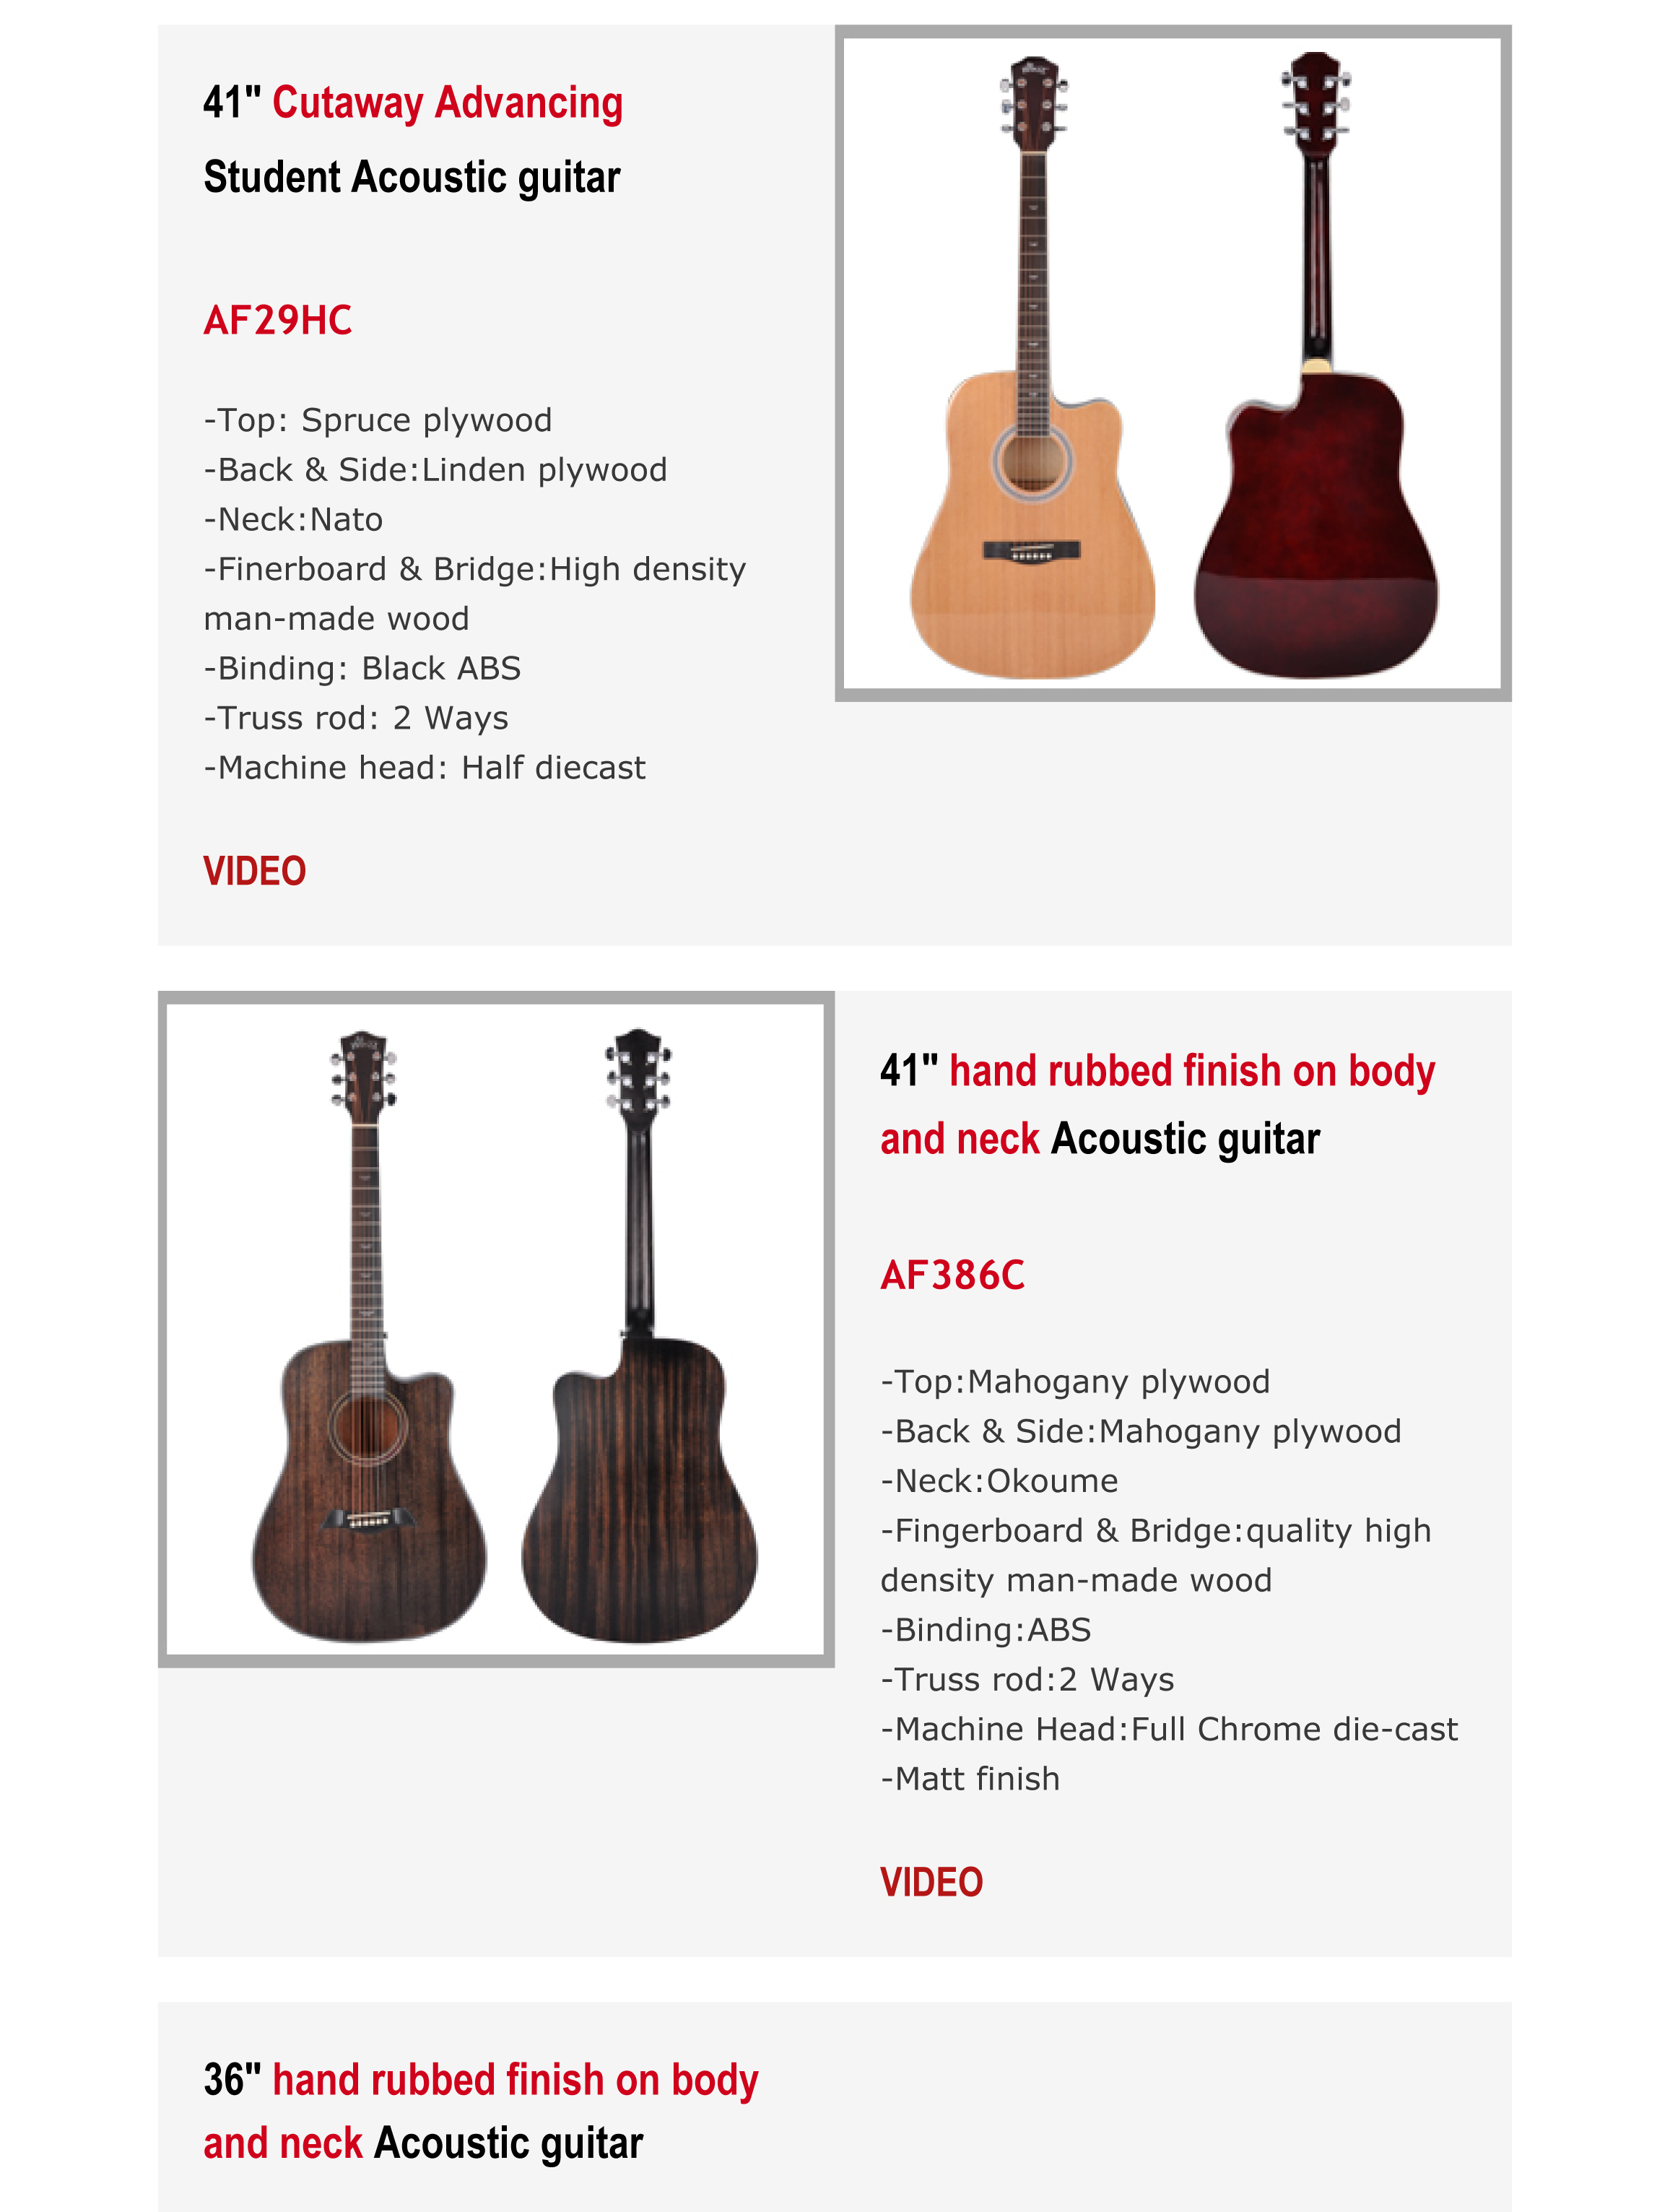 See What New High Quality Guitars Aileen Music Developed For You-2